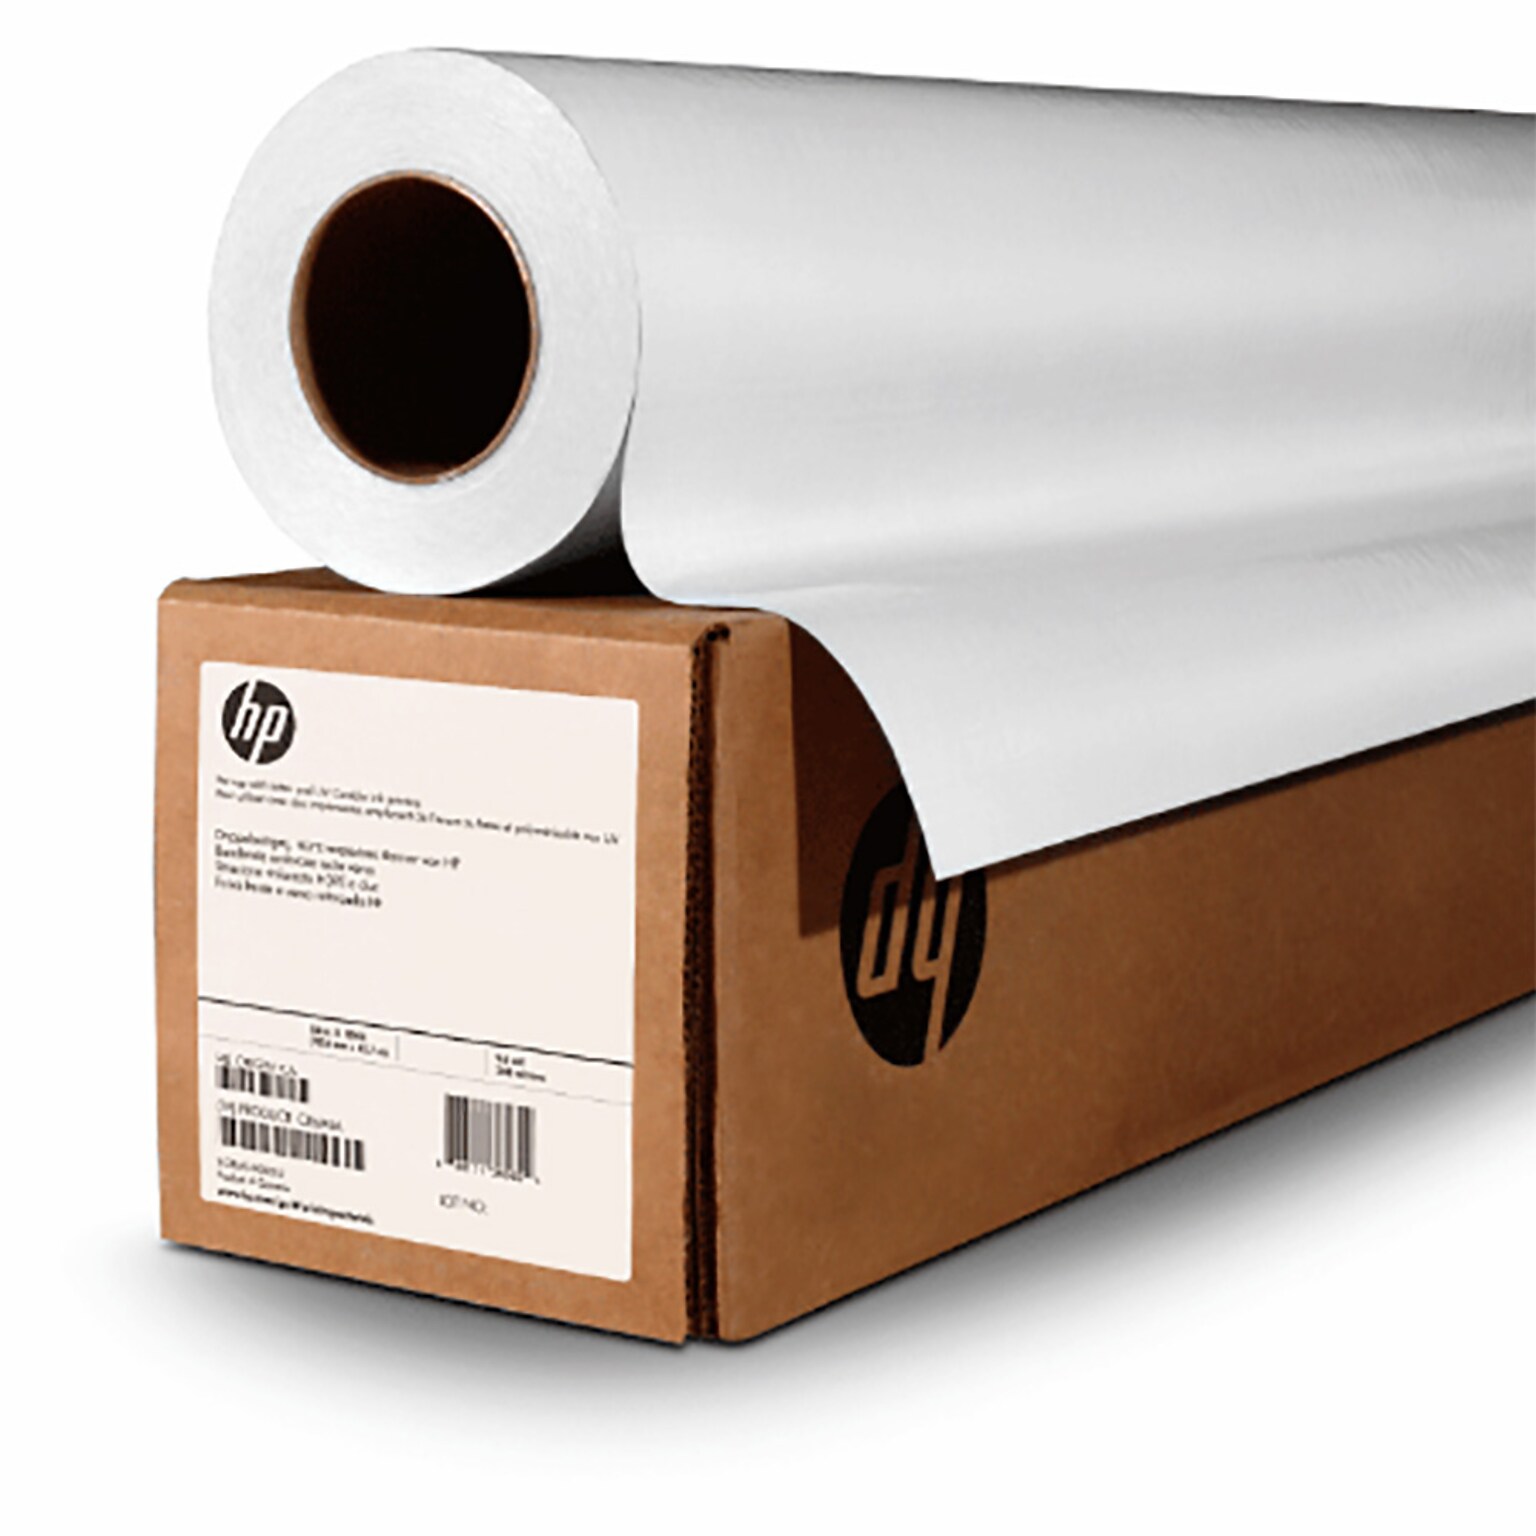 HP Universal Wide Format Premium Instant-dry Photo Paper, 24 x 75, Gloss Finish (Q7991A)